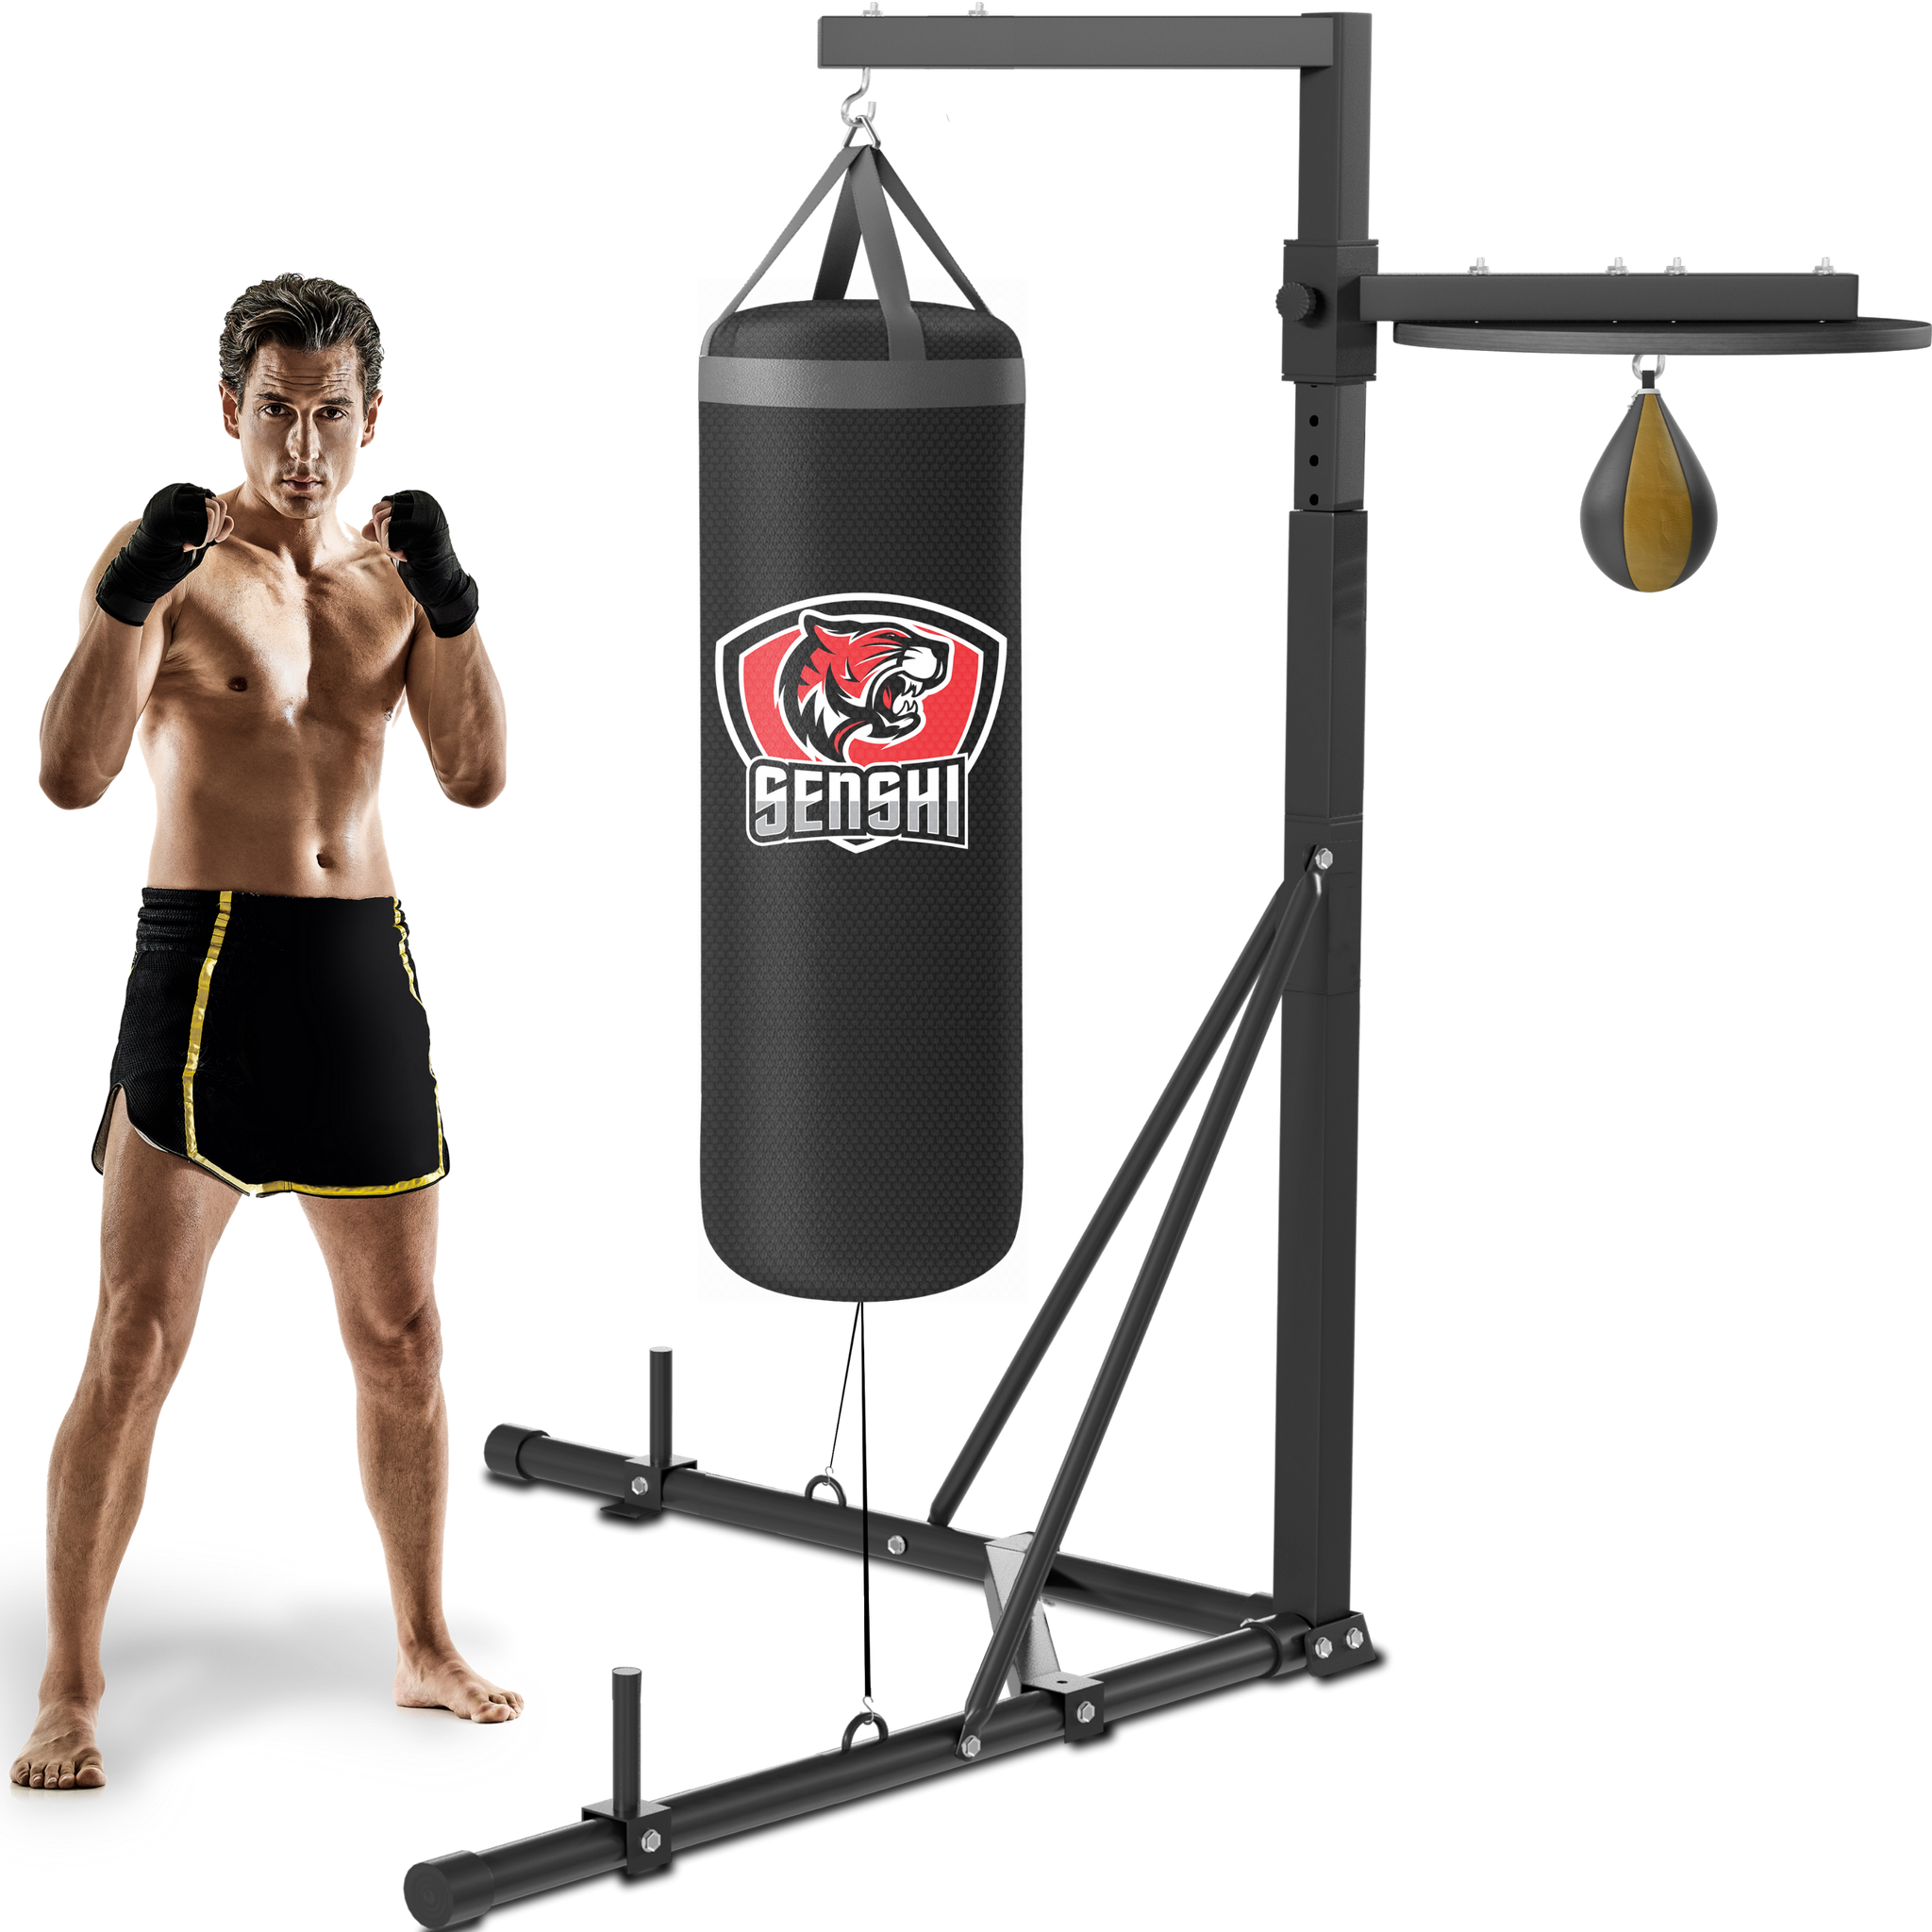 Senshi Japan XXL Heavy Punch Bag & Speed Ball Stand - Solid Steel Platform, Comes With Punch Bag & Leather Speed Ball